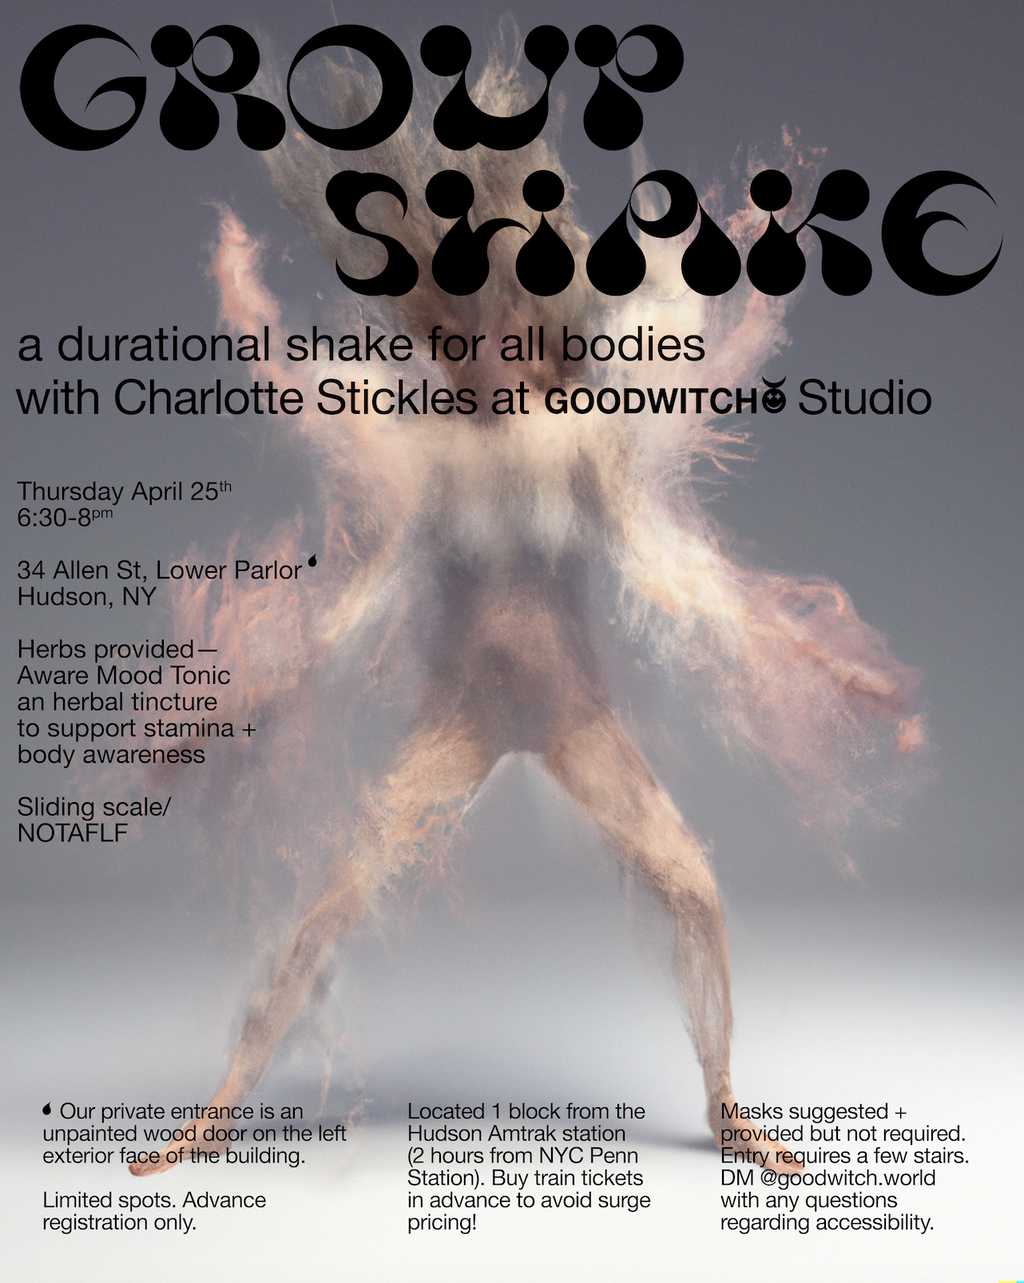 GROUP SHAKE — a durational shake for all bodies with Charlotte Stickles at GOODWITCH Studio